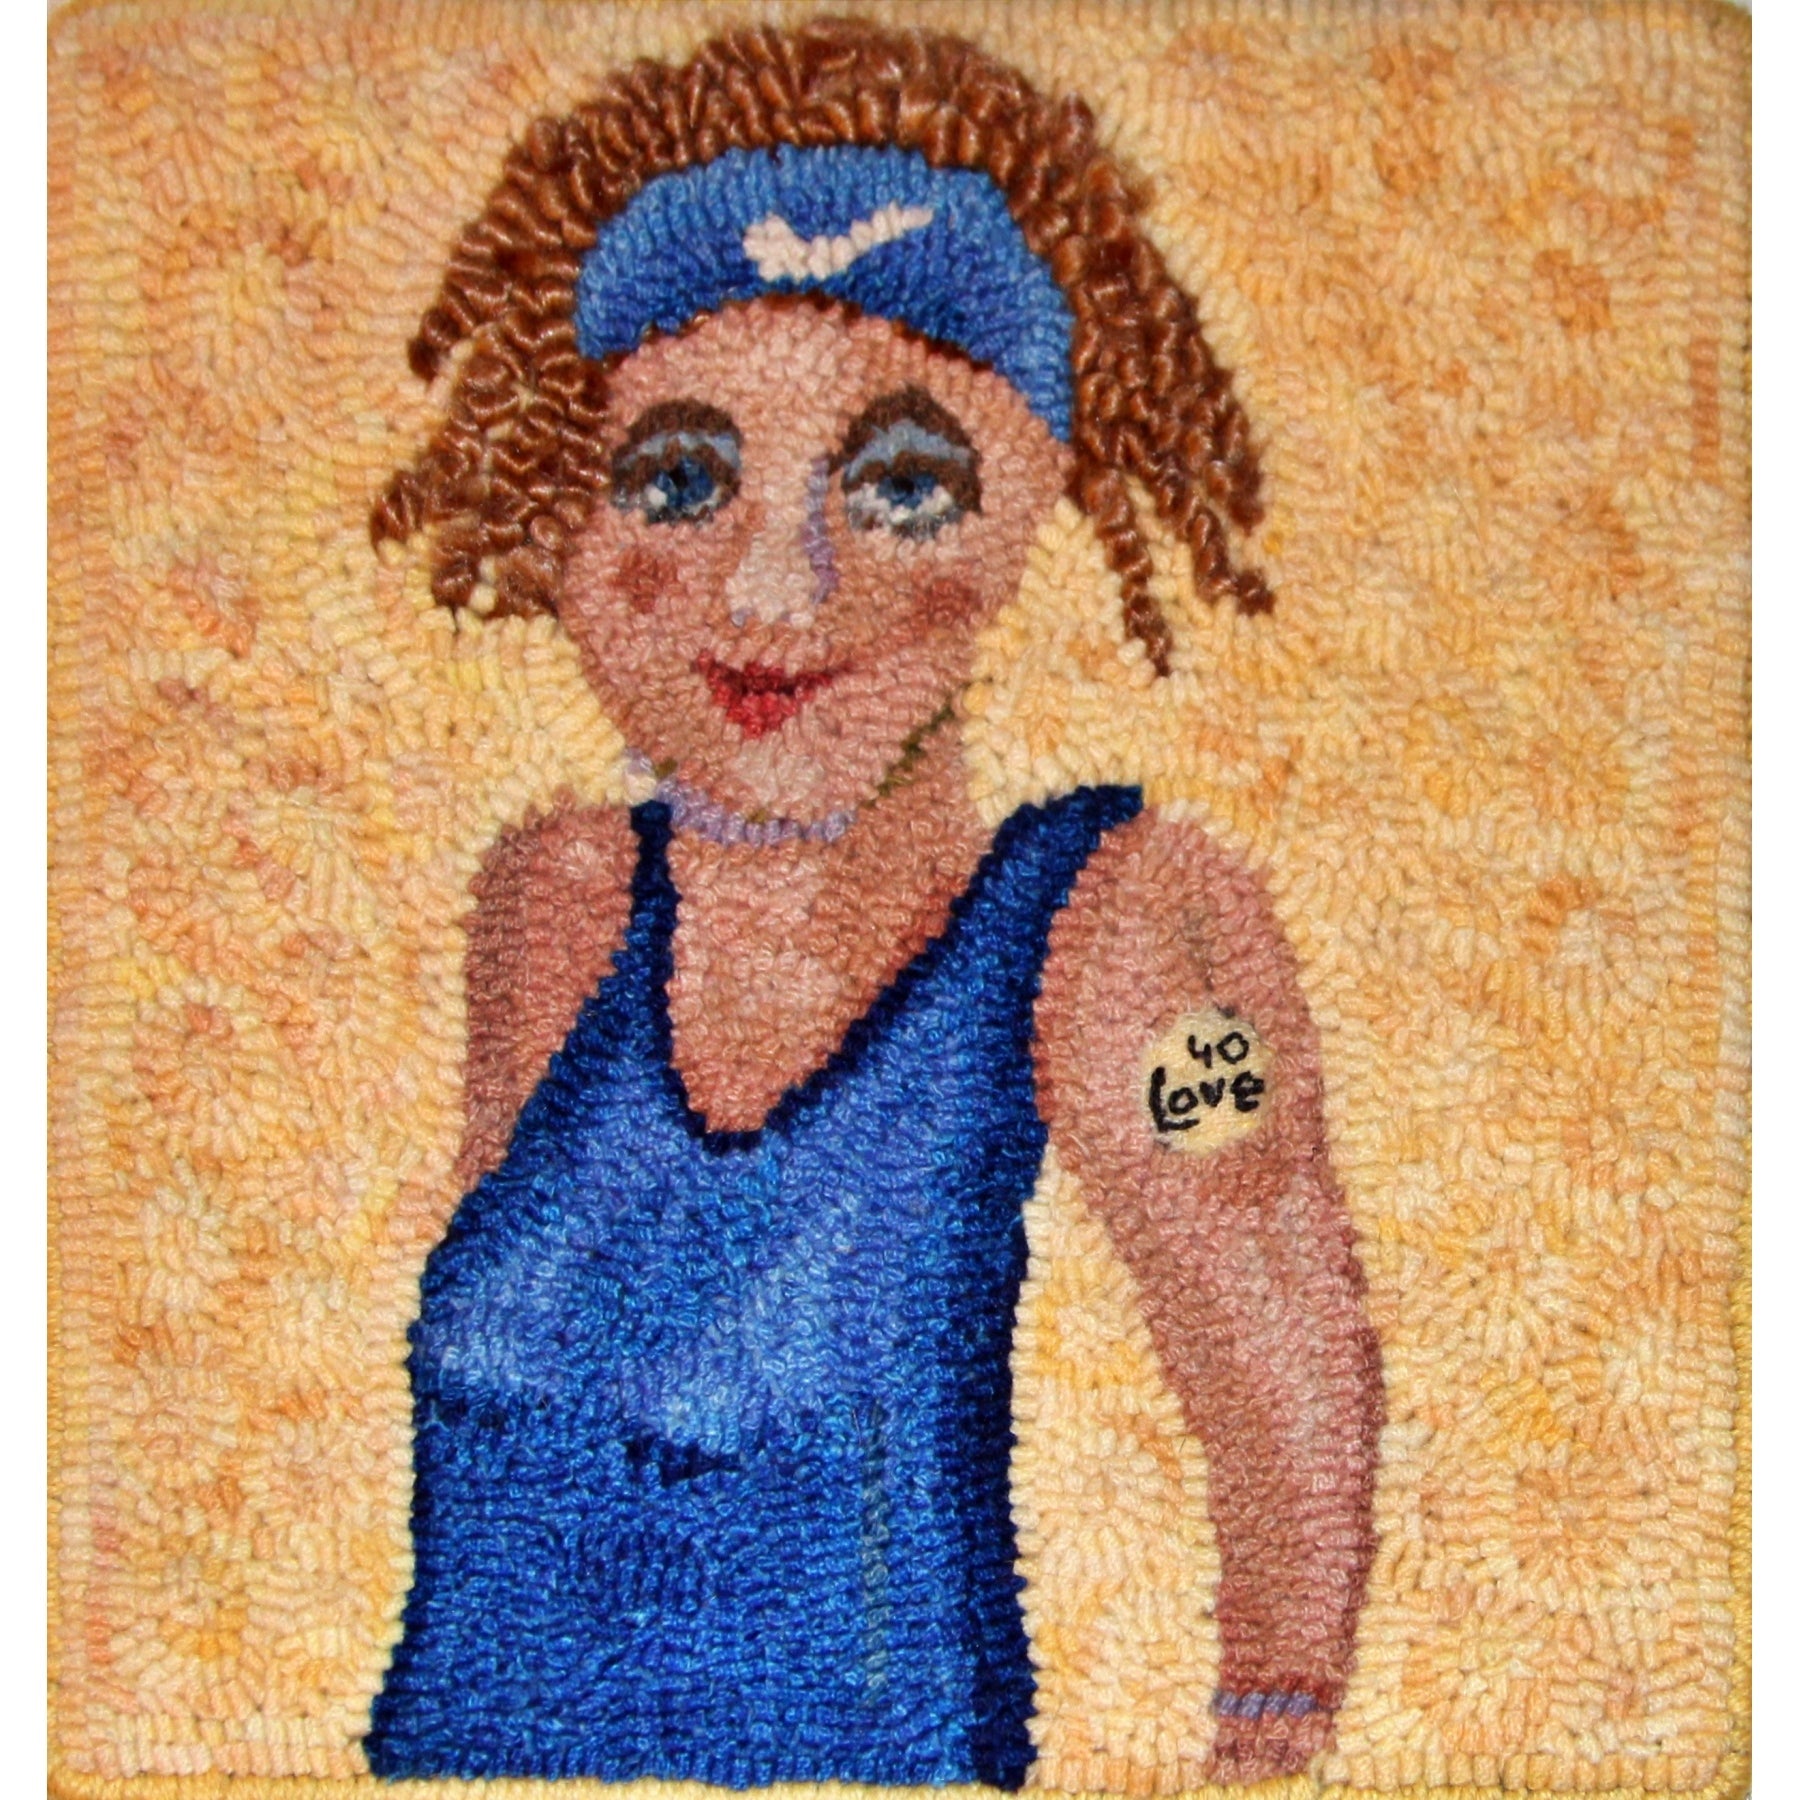 What's She Selling?, rug hooked by Cindy Irwin